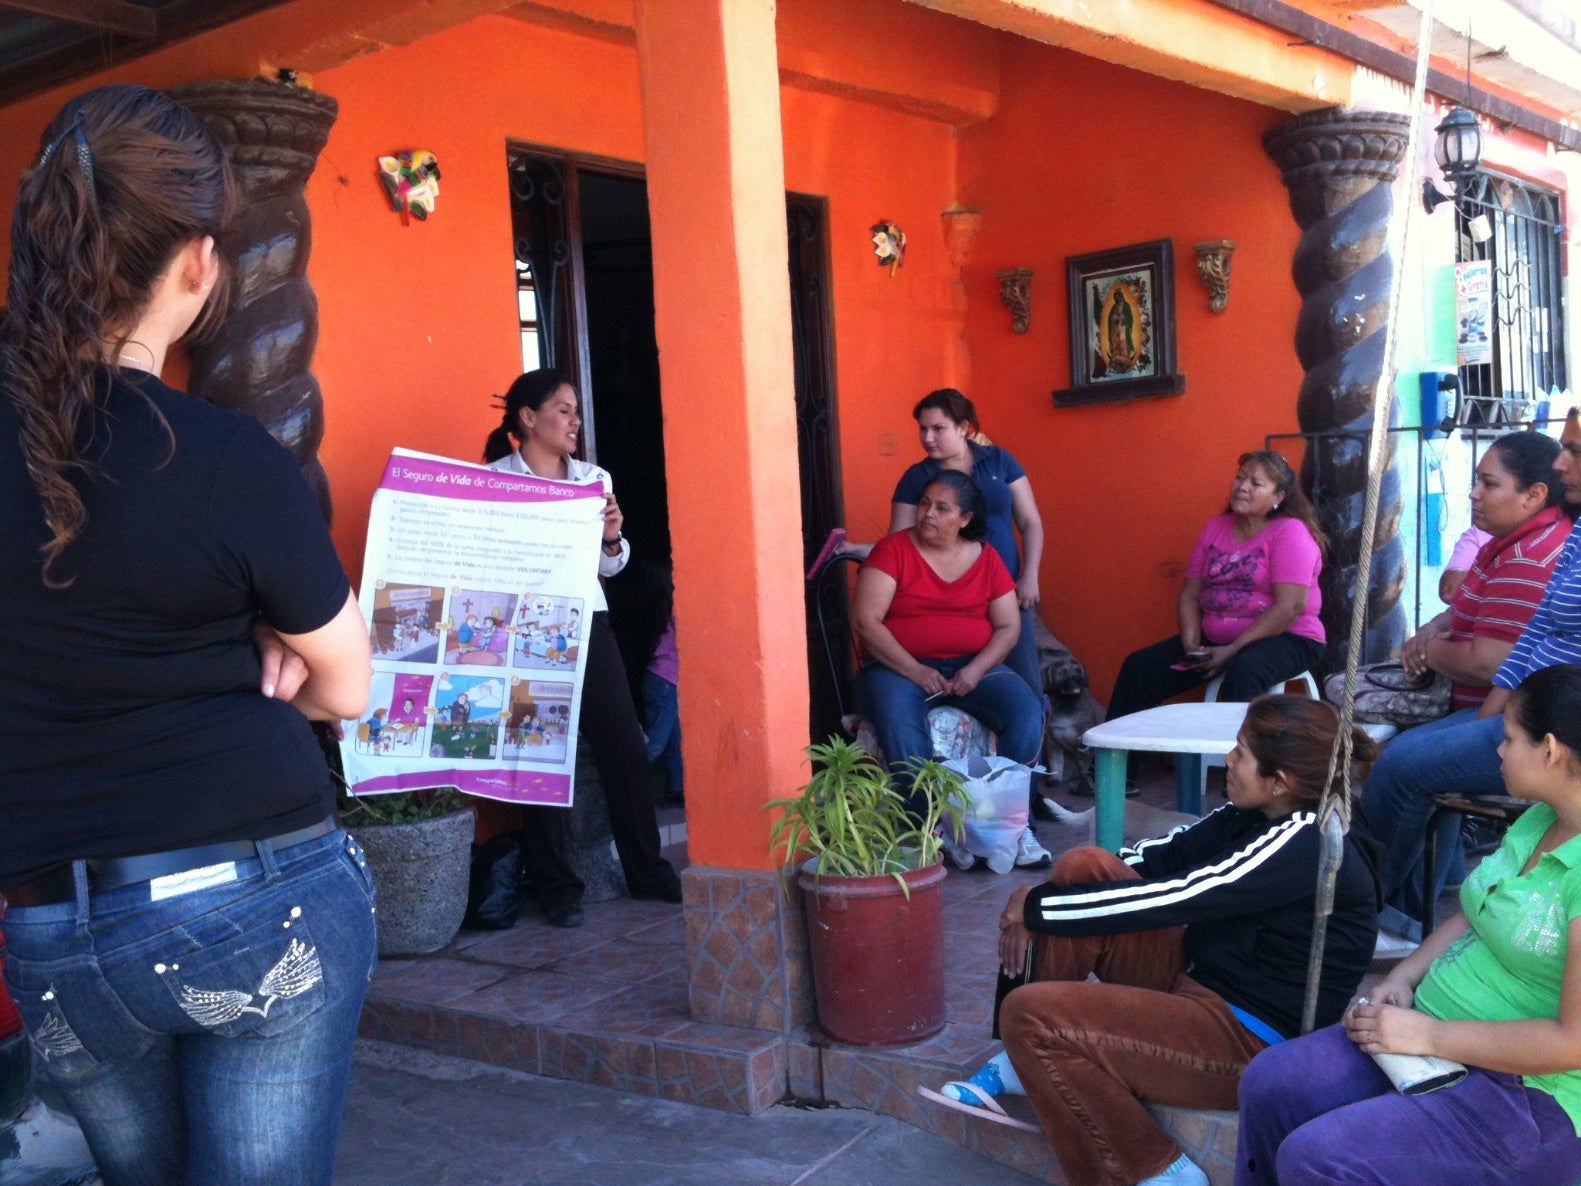 A loan officer sells insurance to a group of clients in Mexico.